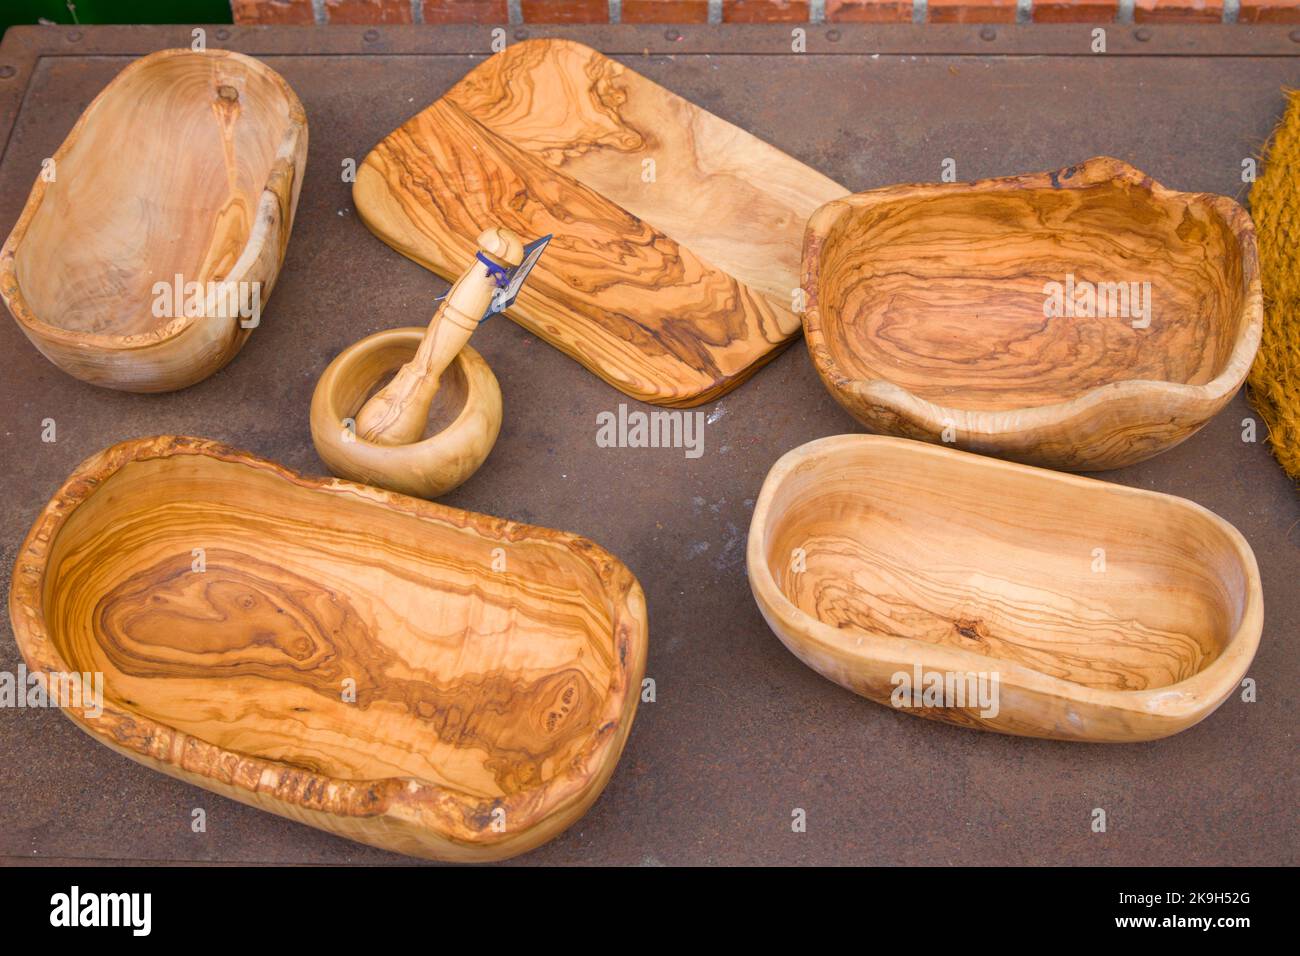 France, Cote d'Azur, Nice, olive wood carvings, implements, Stock Photo